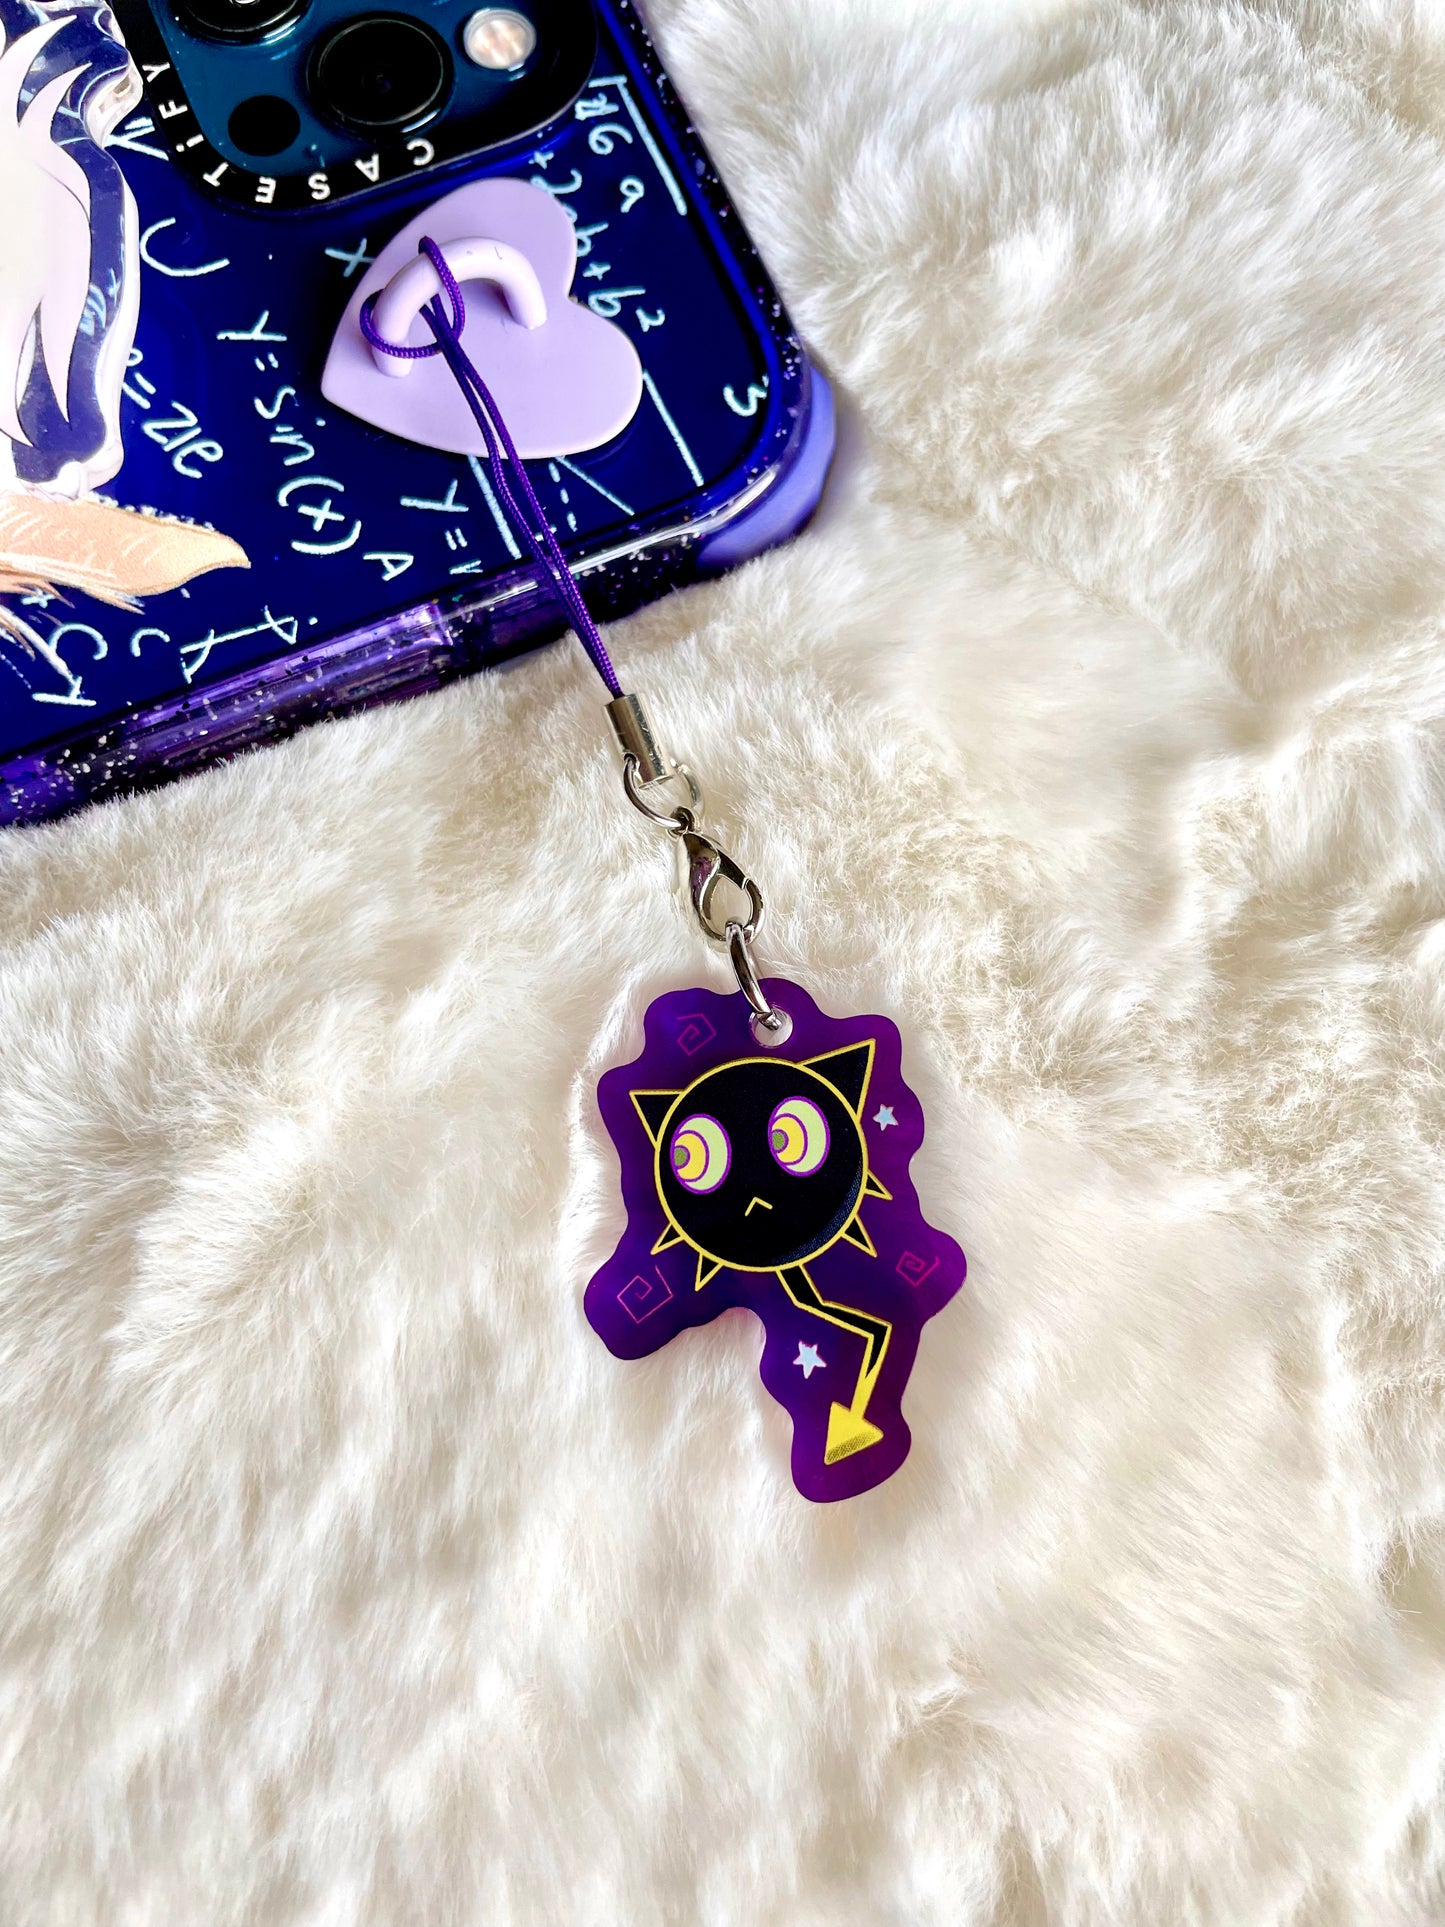 Discounted Keychains and Phone Charms!